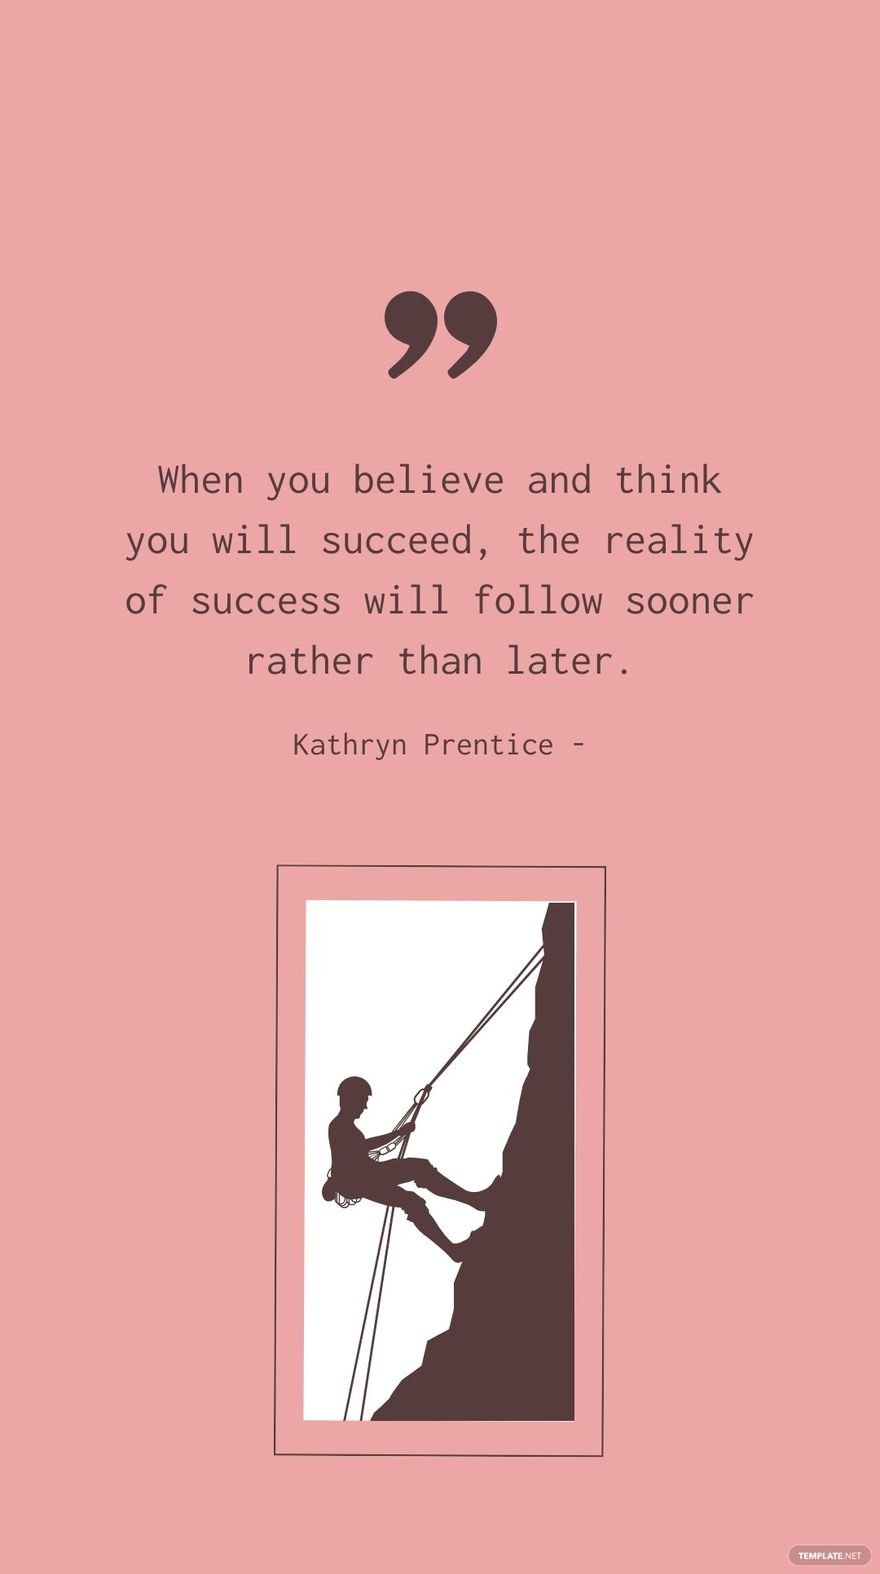 Kathryn Prentice - When you believe and think you will succeed, the reality of success will follow sooner rather than later. in JPG